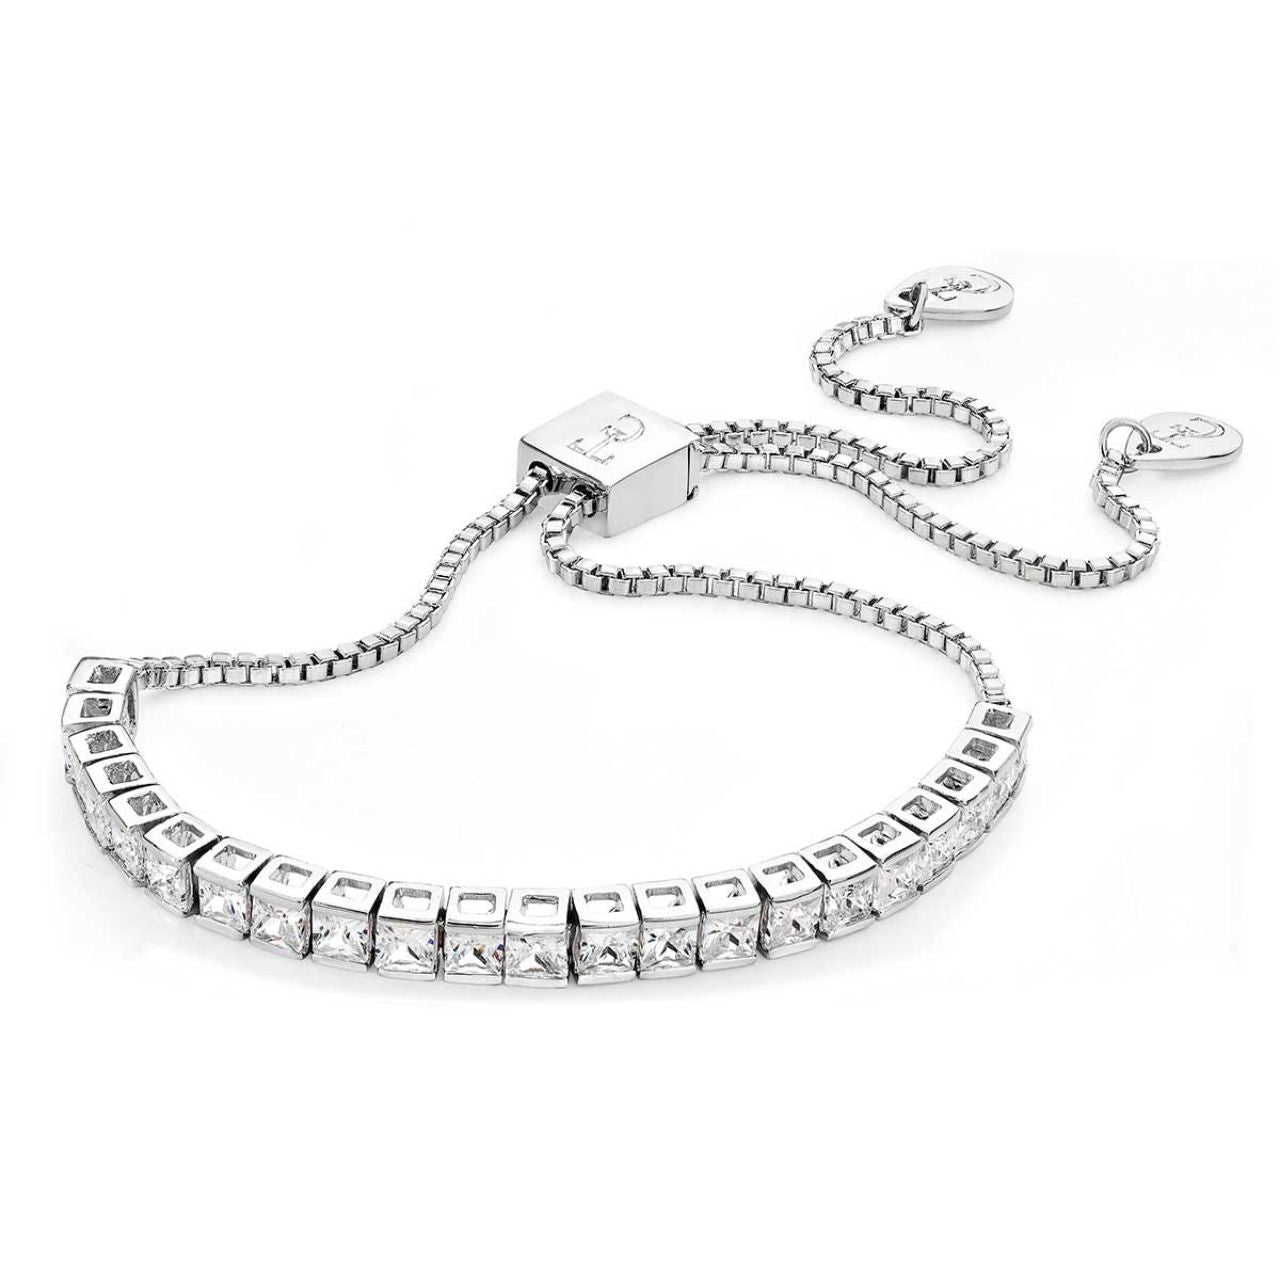 Tipperary Crystal Square Tennis Bolo Bracelet Silver  Twenty-two square claw set Crystals adorn this stunning bracelet. This bracelet comes in Silver and Rose Gold. It secures with a bolo clasp which slides up and down the box chain and features two TC Fobs to ﬁnish.